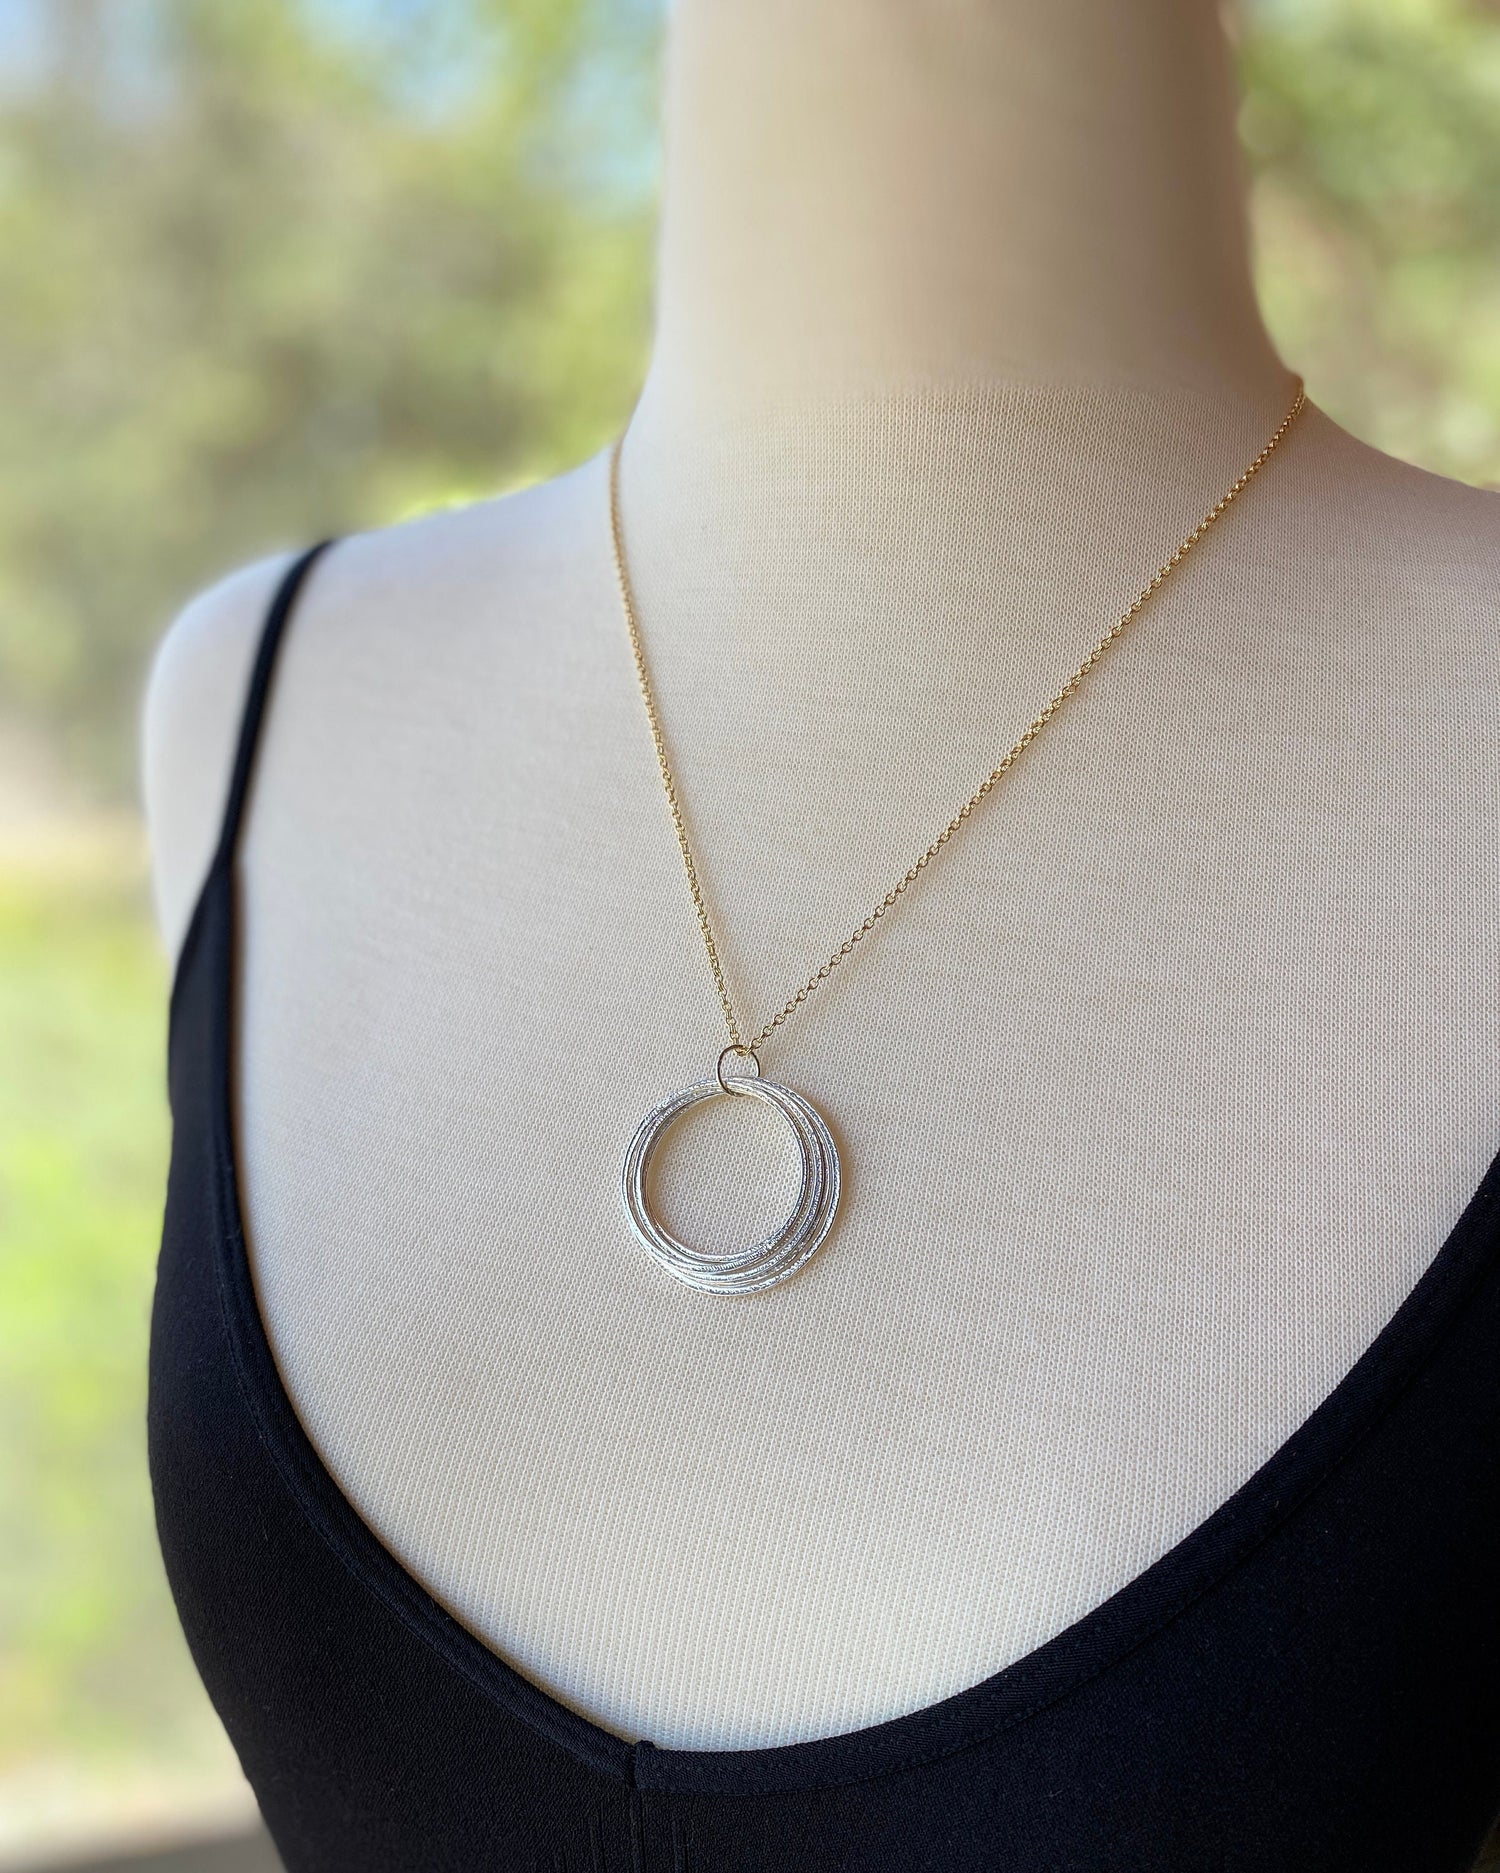 70th Birthday Mixed Metal Milestone Necklace, Handcrafted Bold Sparkly Circles Perfectly Imperfect Pendant on 14K Gold Filled Chain